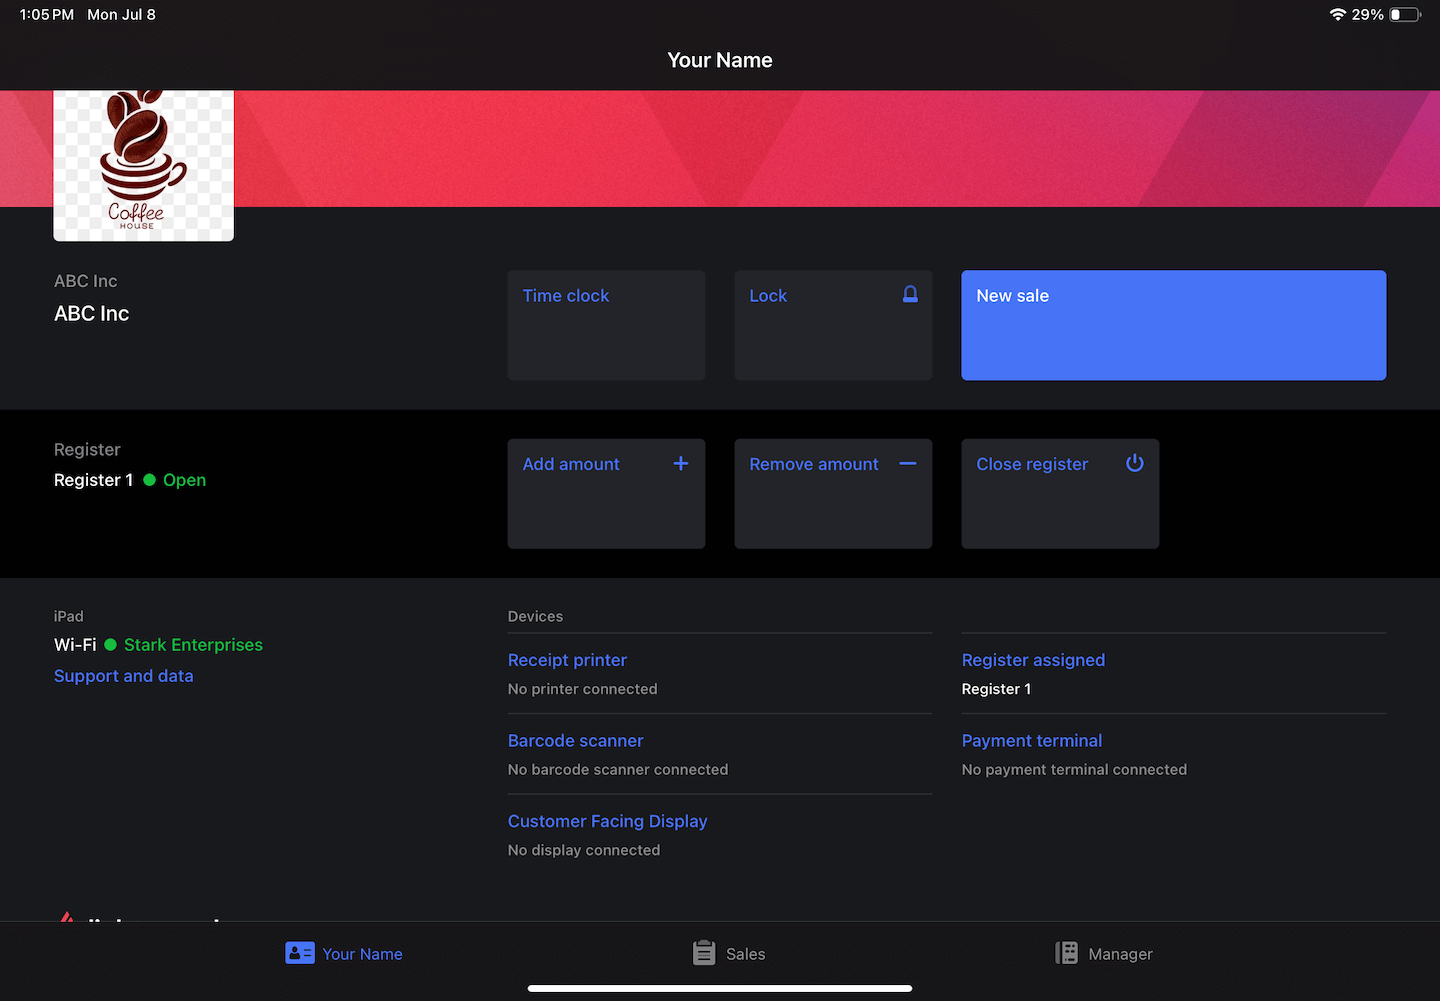 Profile screen on iPad with register open and New sale button shown.